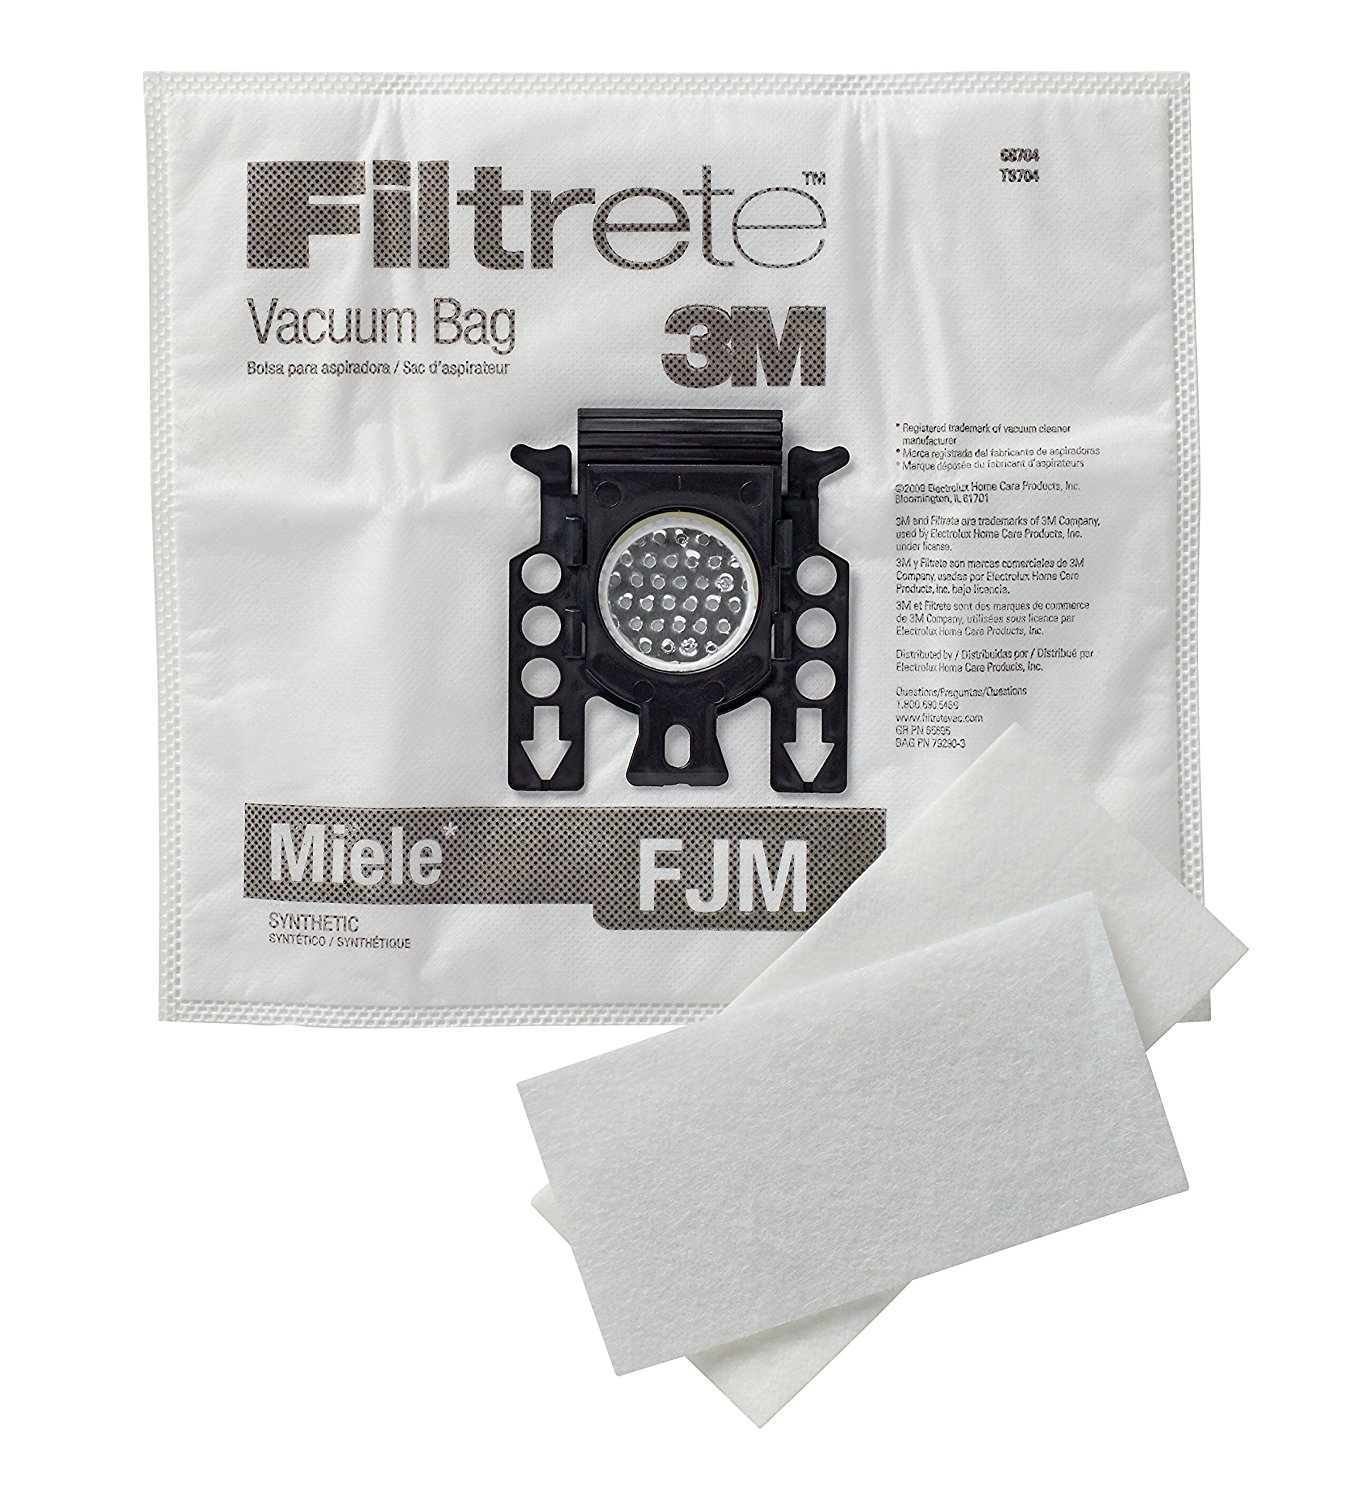 Miele FJM Synthetic Vacuum Bags and Filters by Filtrete, 10 Bags and 4 Filters